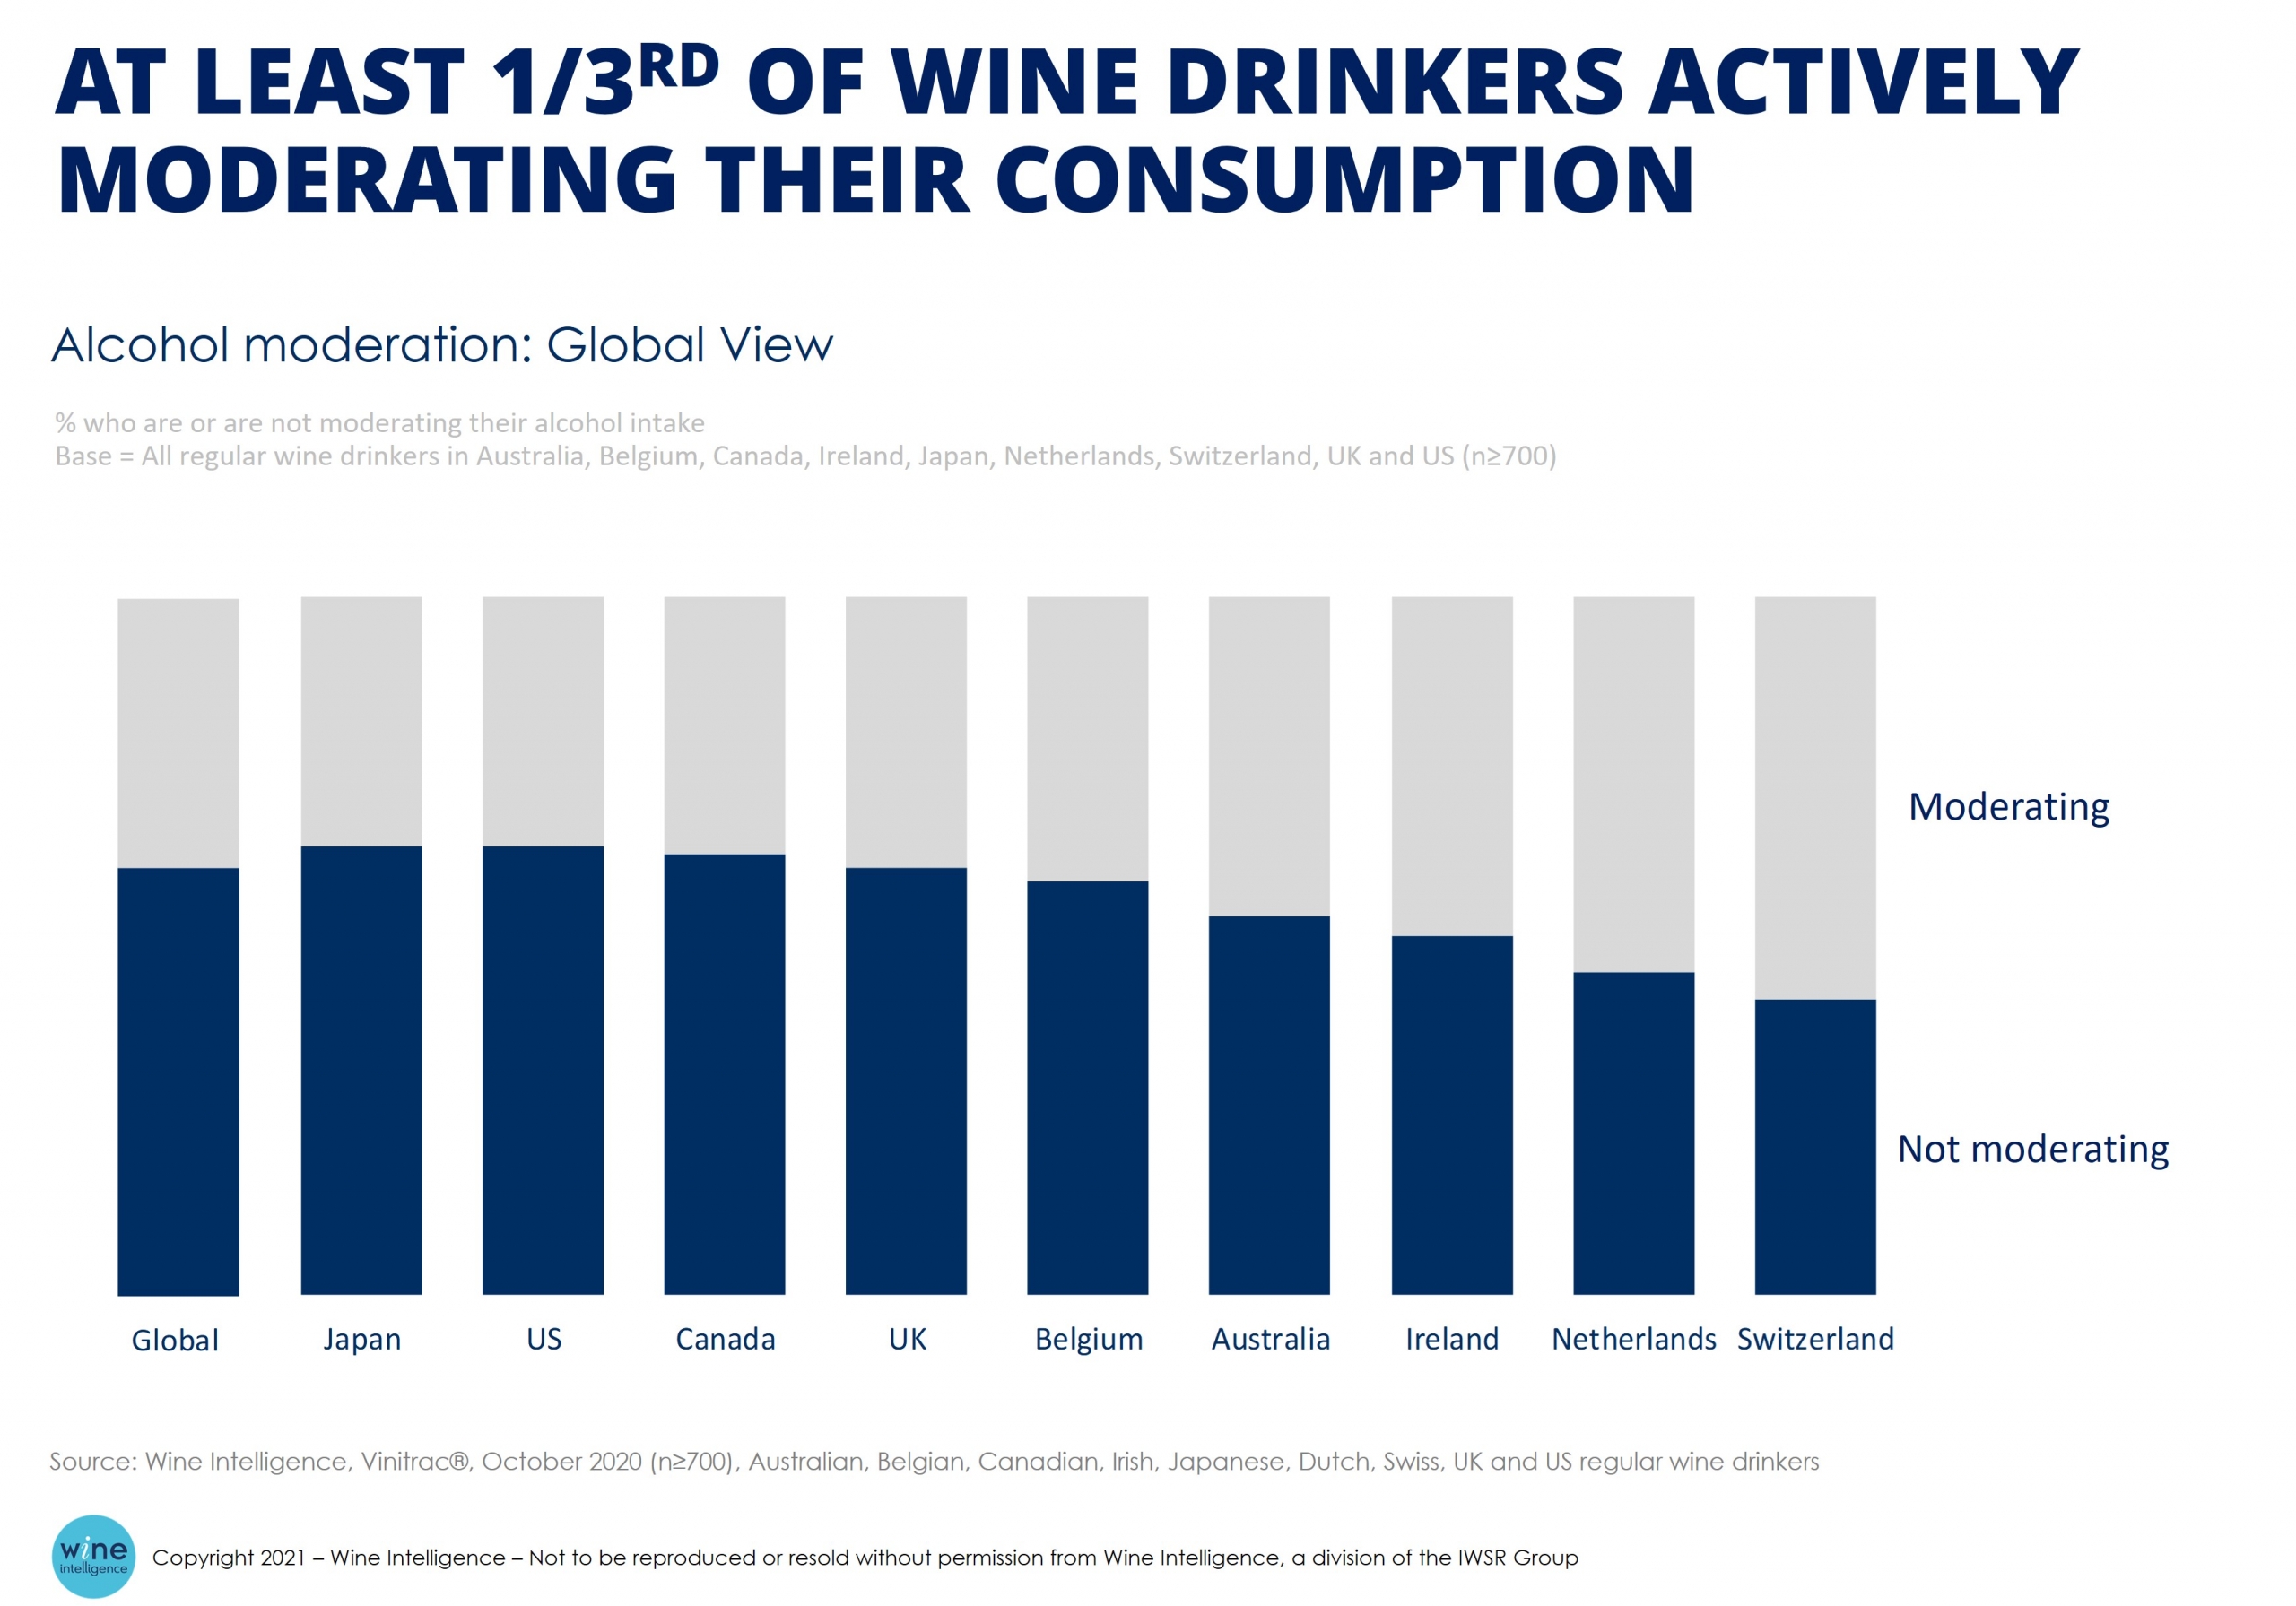 WI chart moderation percentage across wine drinkers key countries updated scaled - What are the opportunities for the no/low-alcohol wine category?